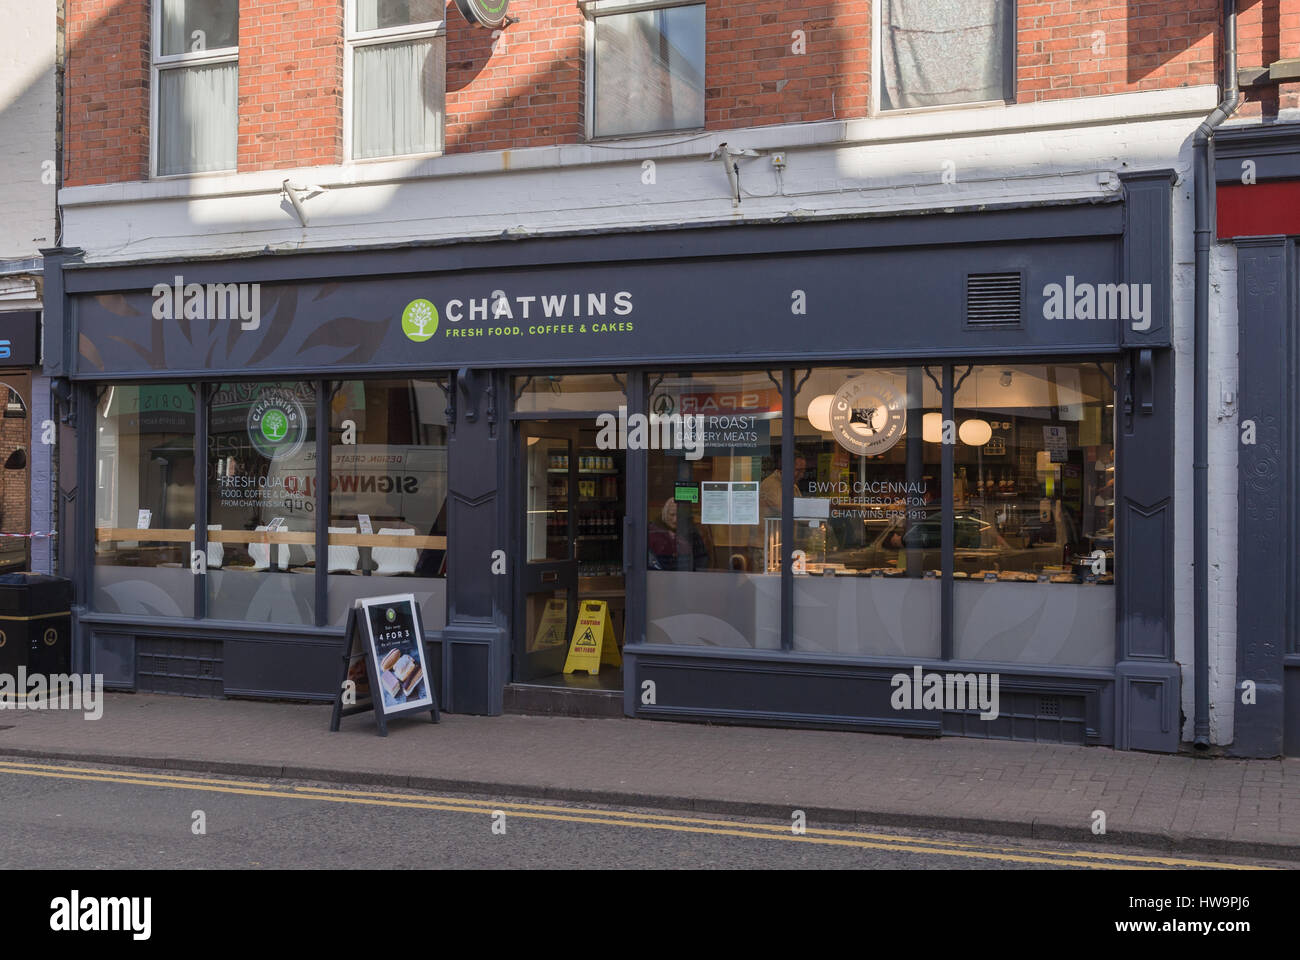 Chatwins bakery and cafe on Castle St. Llangollen one of 20 outlets owned and operated by Chatwins based in Nantwich Stock Photo